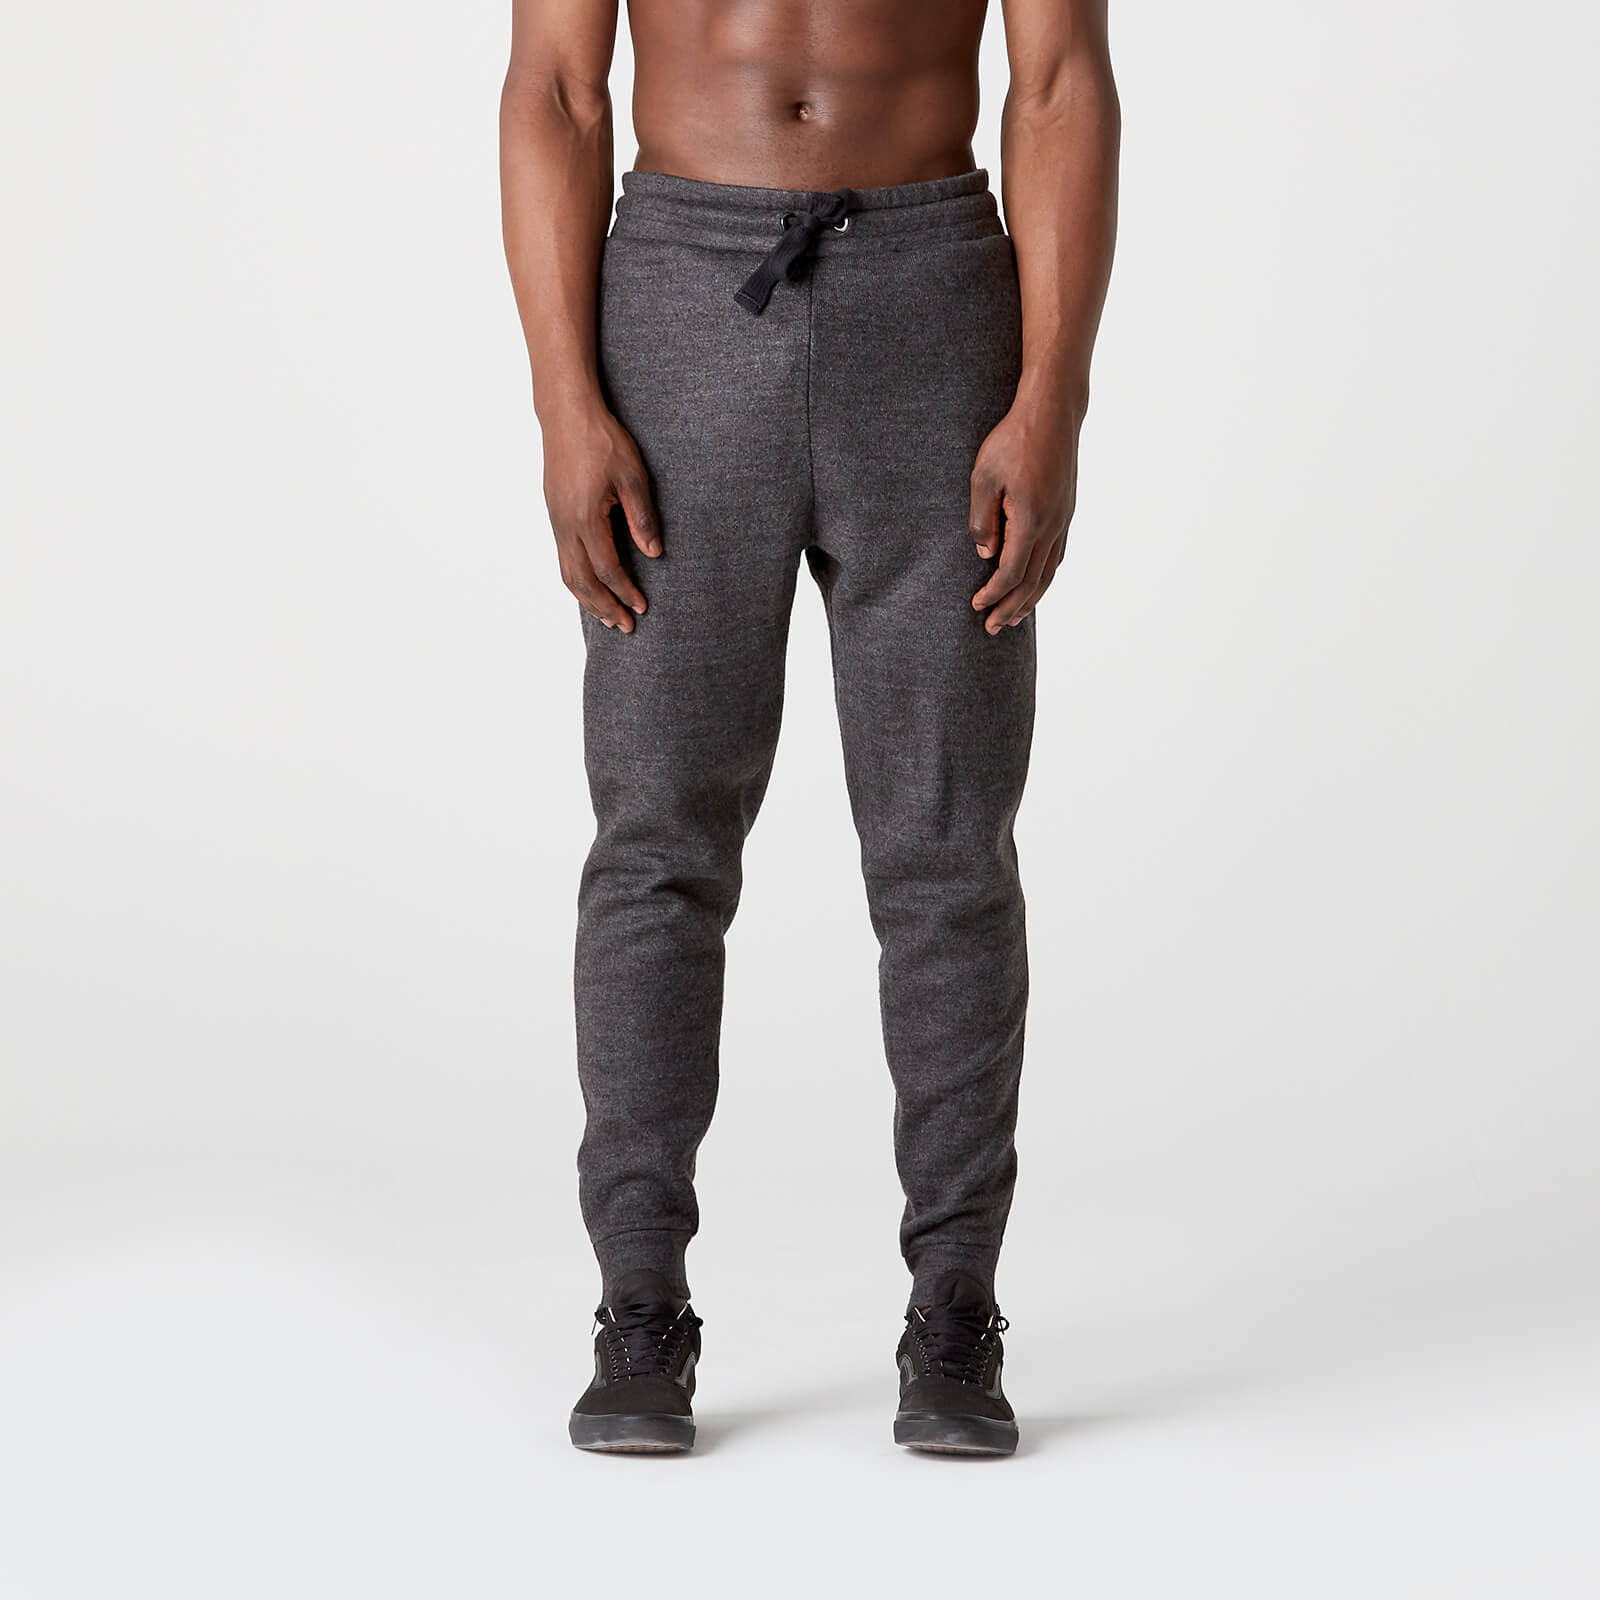 Myprotein Luxe Leisure Joggers - Slate